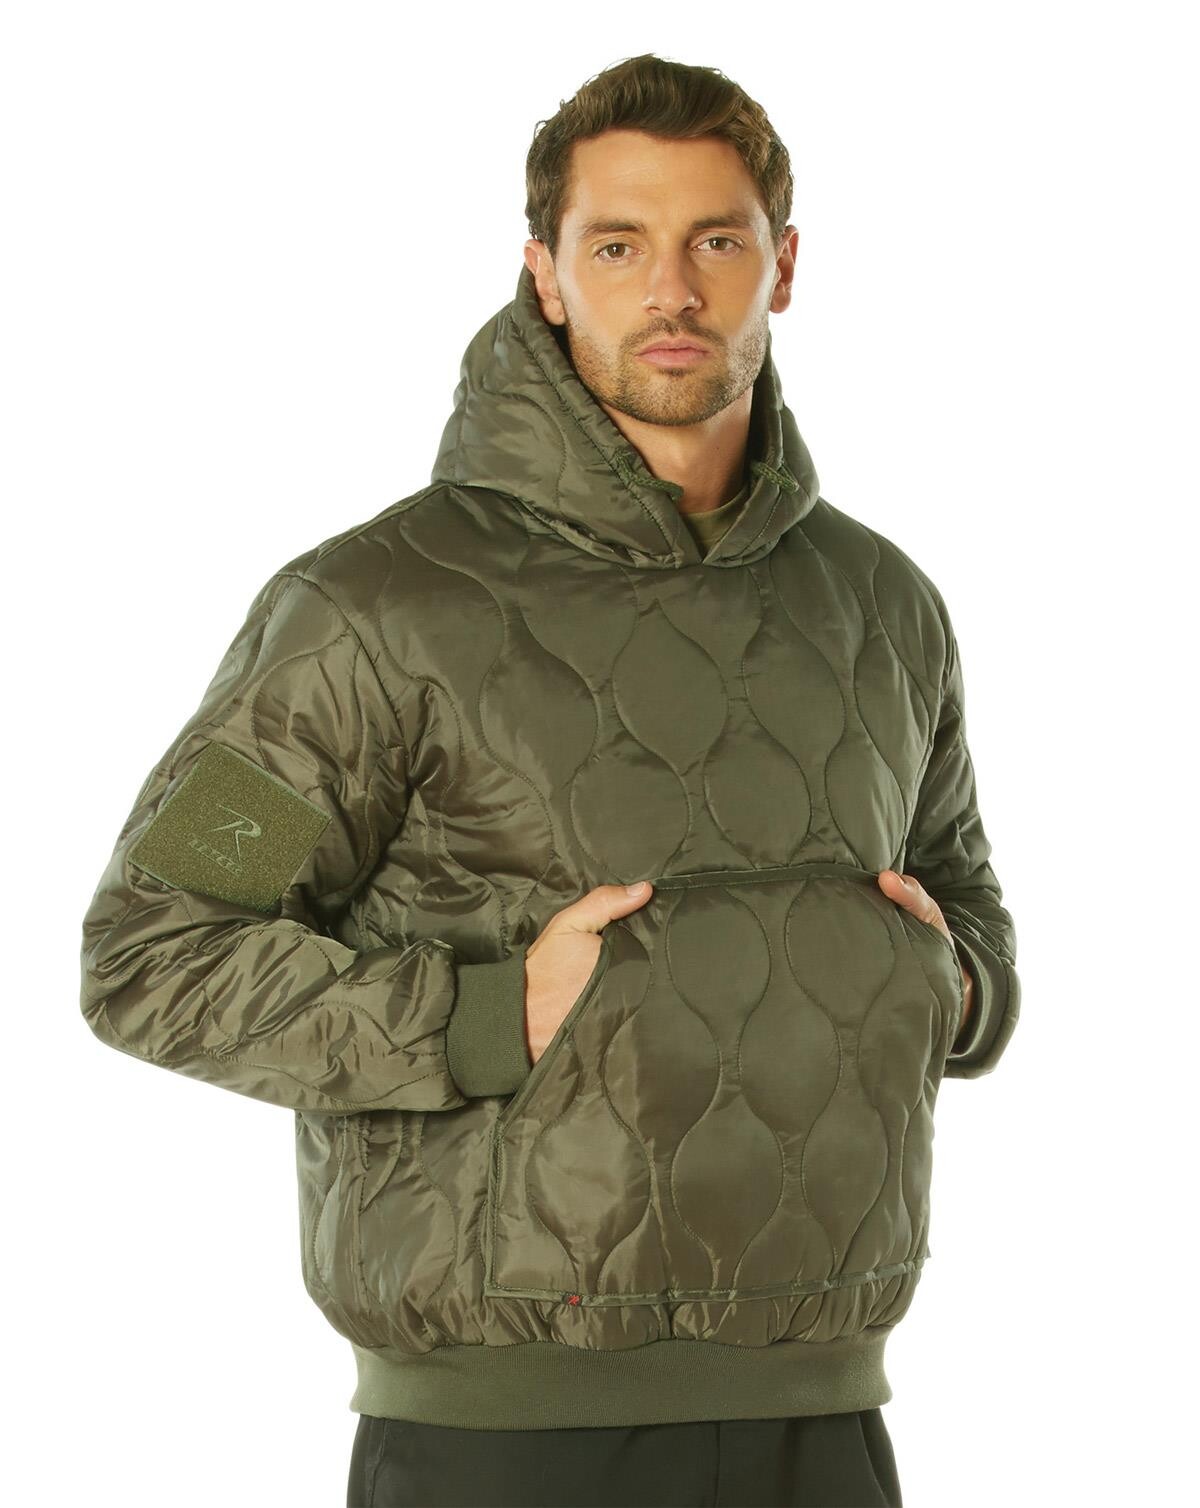 Rothco Quilted Woobie Hooded Sweatshirt (Oliven, M)